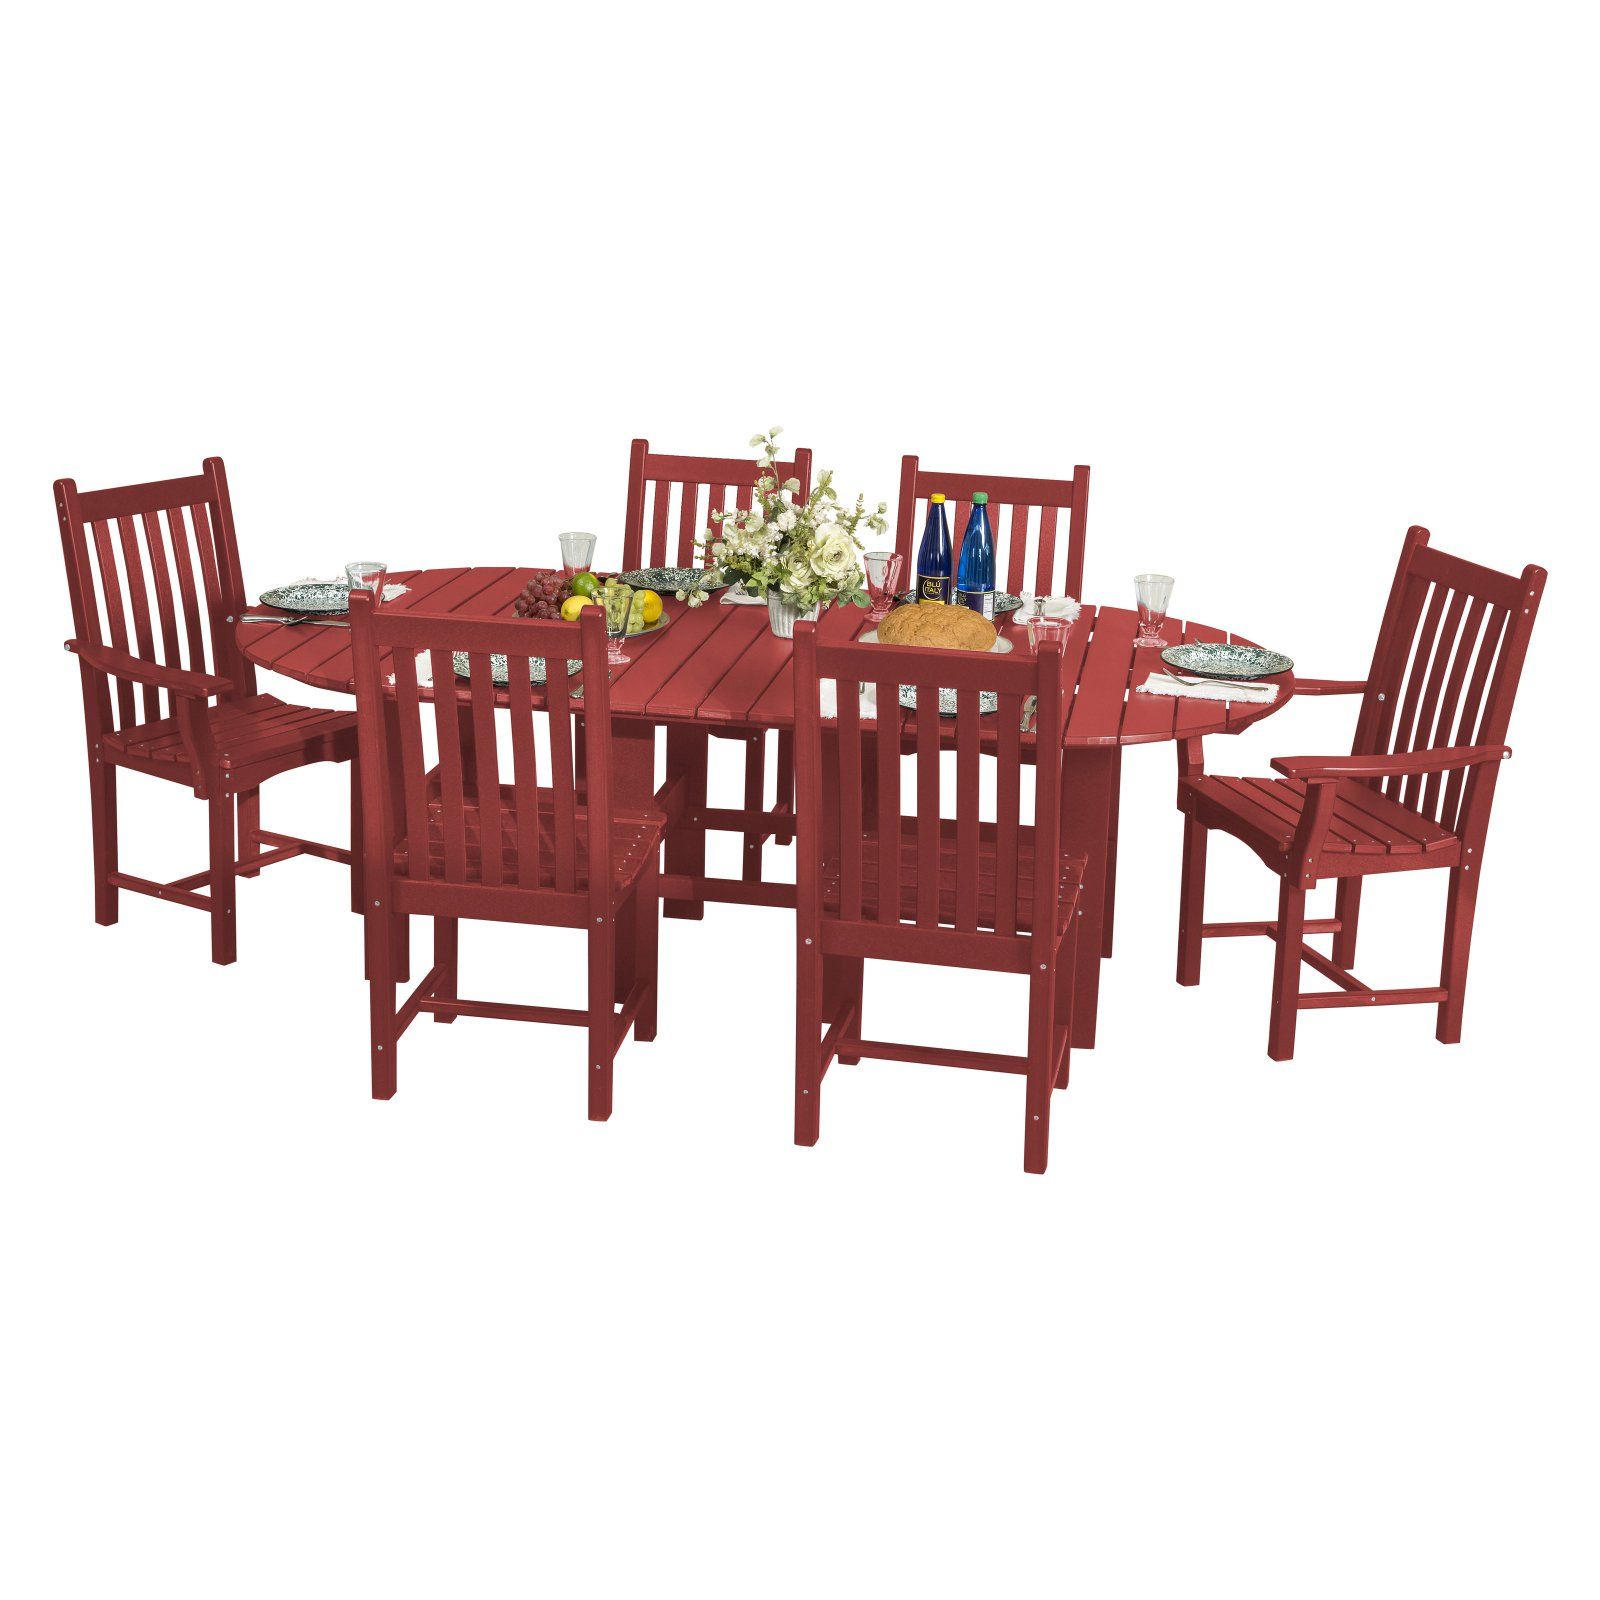 Wildridge Classic Recycled Plastic 7 Piece Oval Patio Dining Set For Oval 7 Piece Outdoor Patio Dining Sets (View 8 of 15)